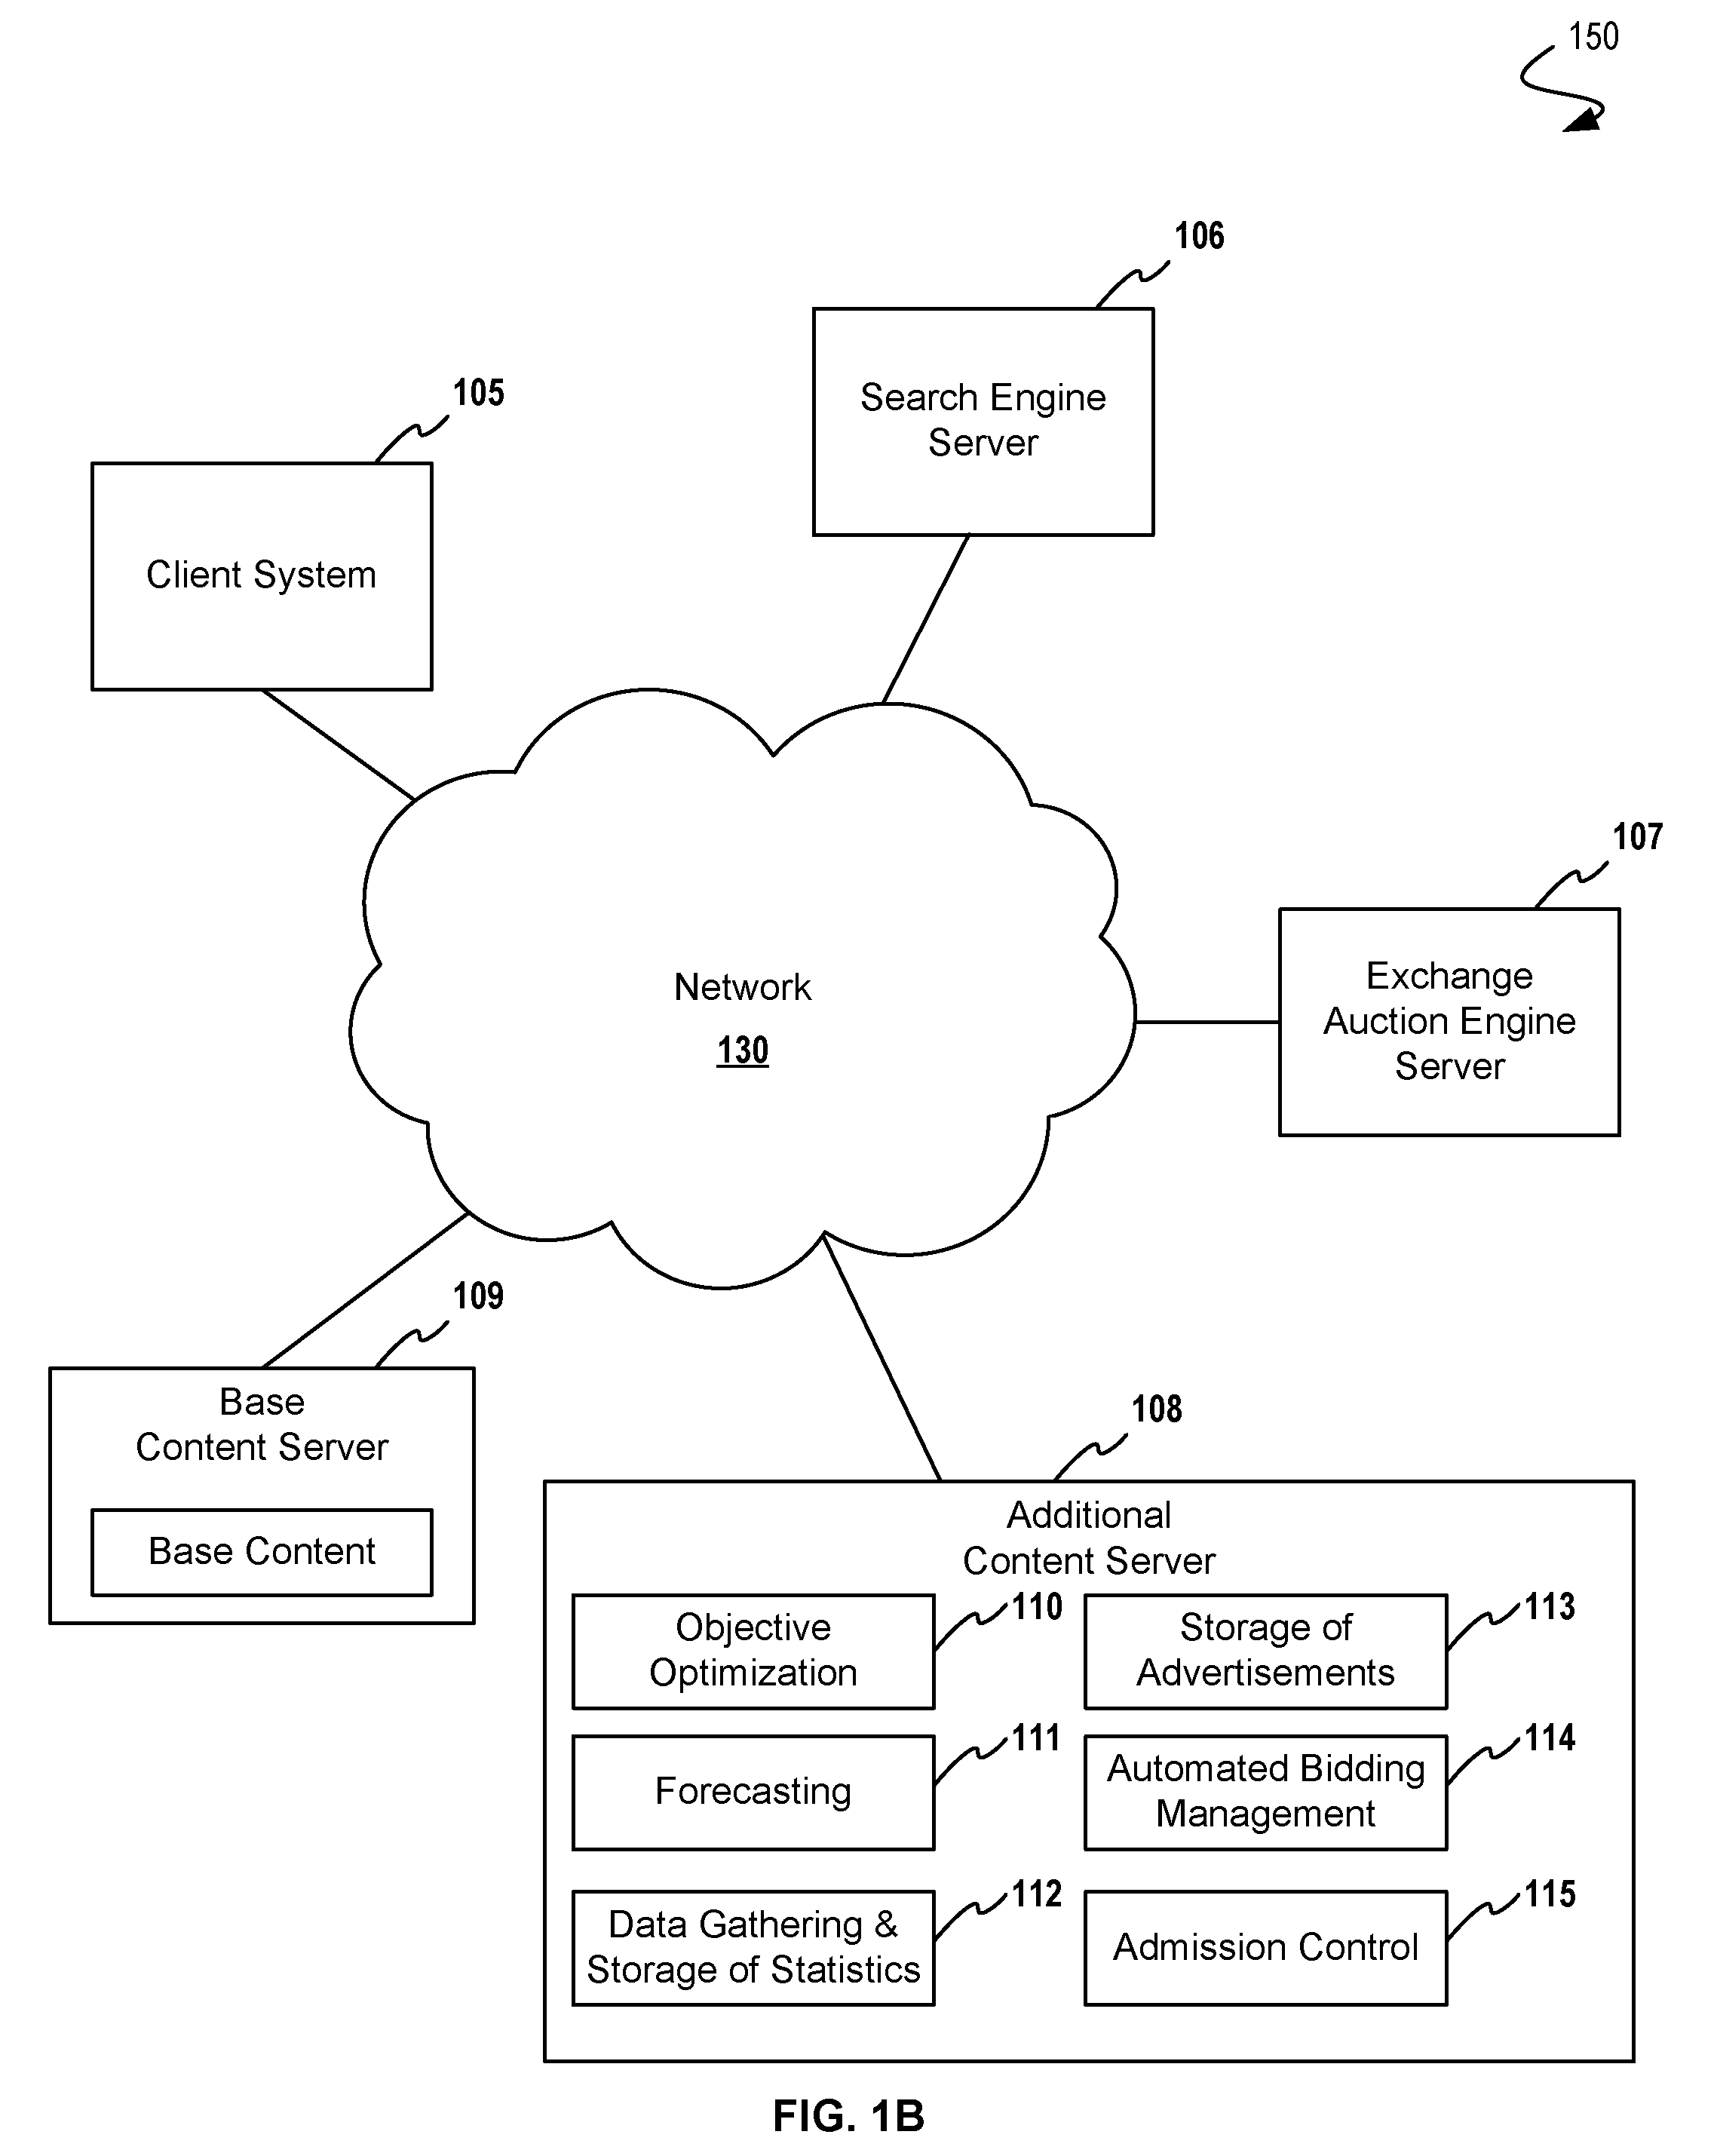 System and Method for Automatic Matching of Highest Scoring Contracts to Impression Opportunities Using Complex Predicates and an Inverted Index